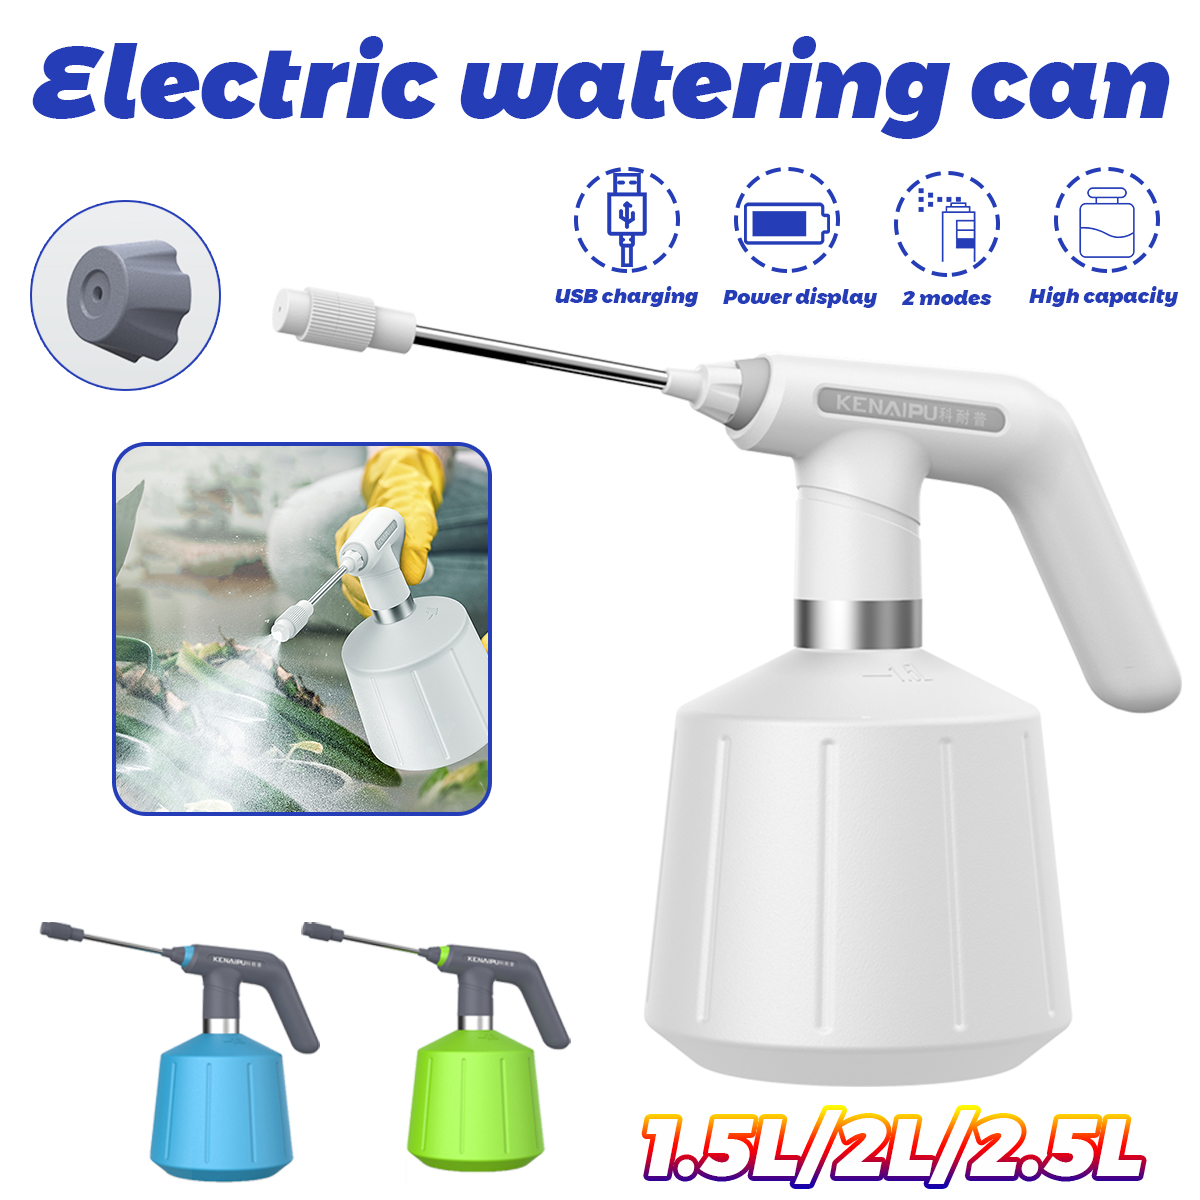 15L2L25L-Electric-Disinfection-Watering-Can-Spray-Bottle-USB-Rechargeable-Spray-Guns-1901189-1